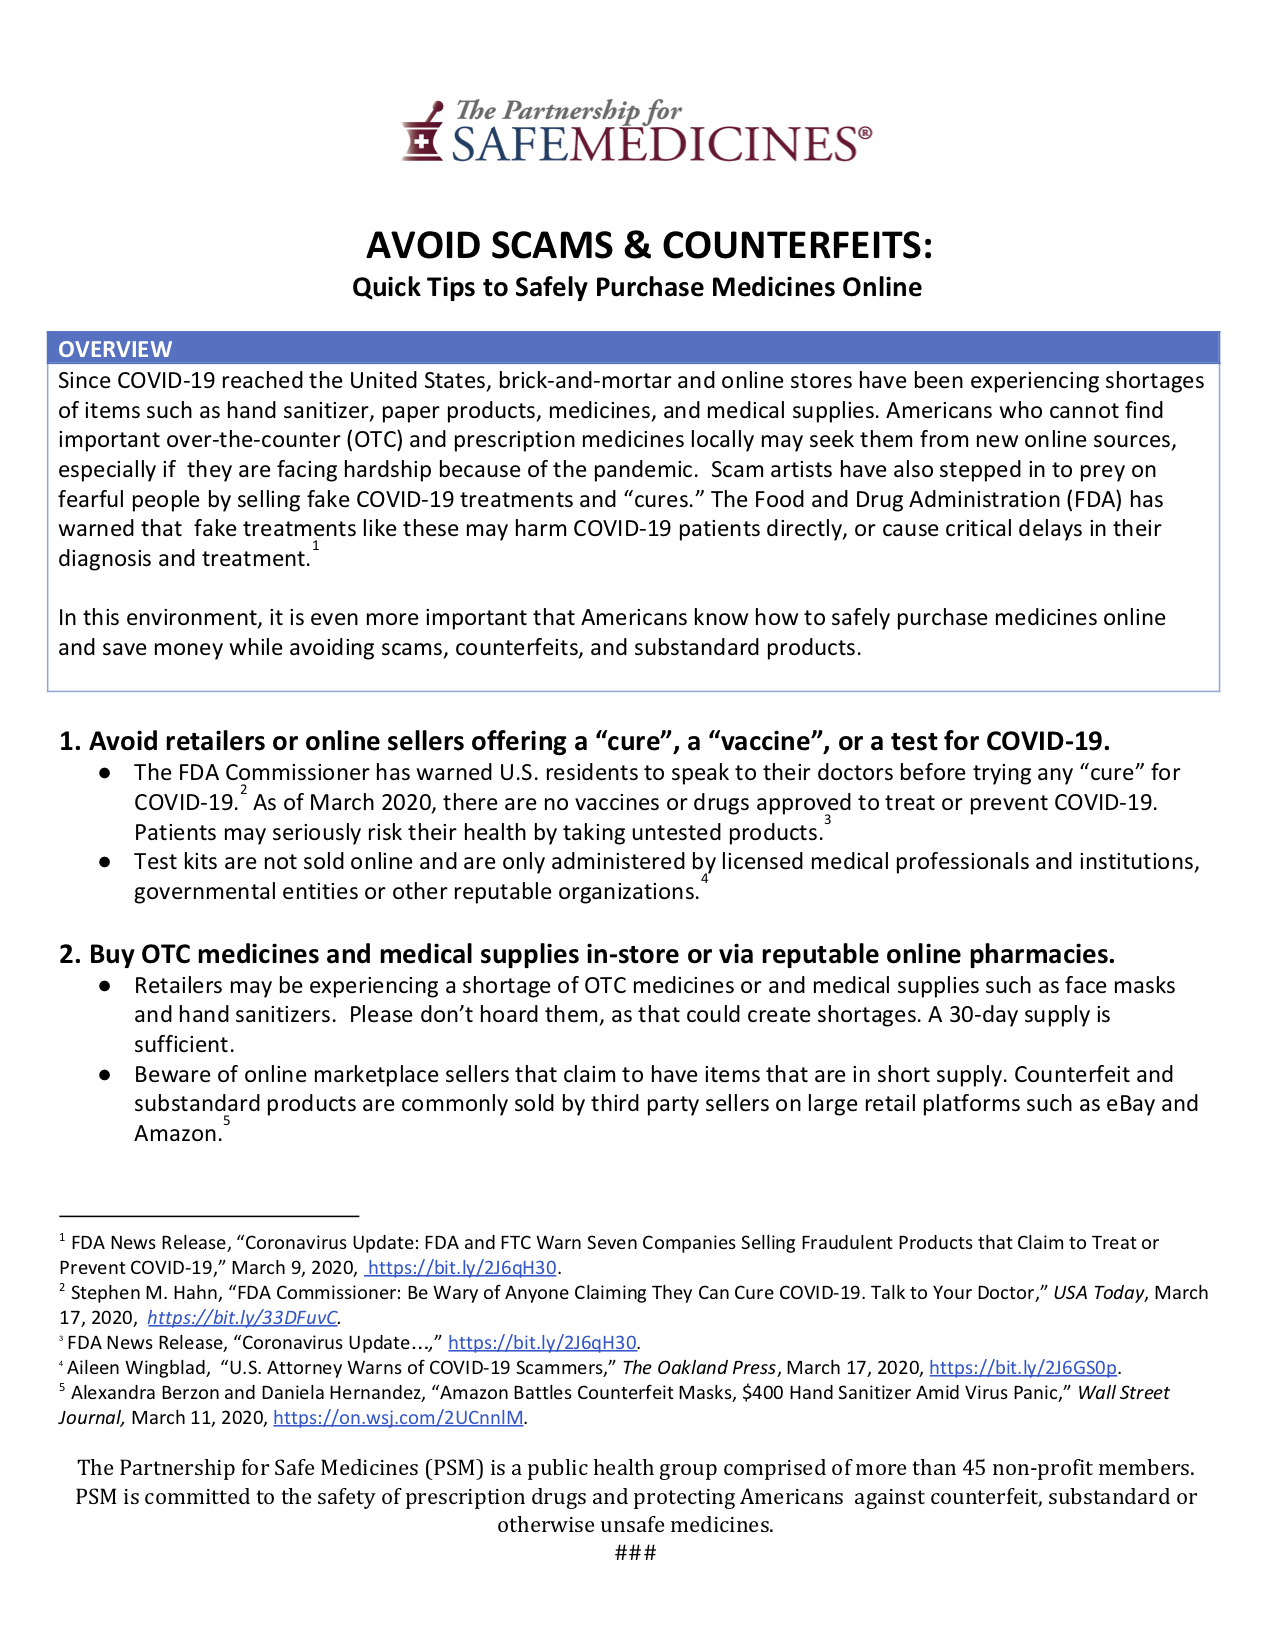 Read our COVID-19 safety<br> tips in <a href="http://www.safemedicines.org/wp-content/uploads/2019/09/Safe-Purchasing-COVID-19-eng-span.pdf">English and Spanish</a> to<br> learn more.